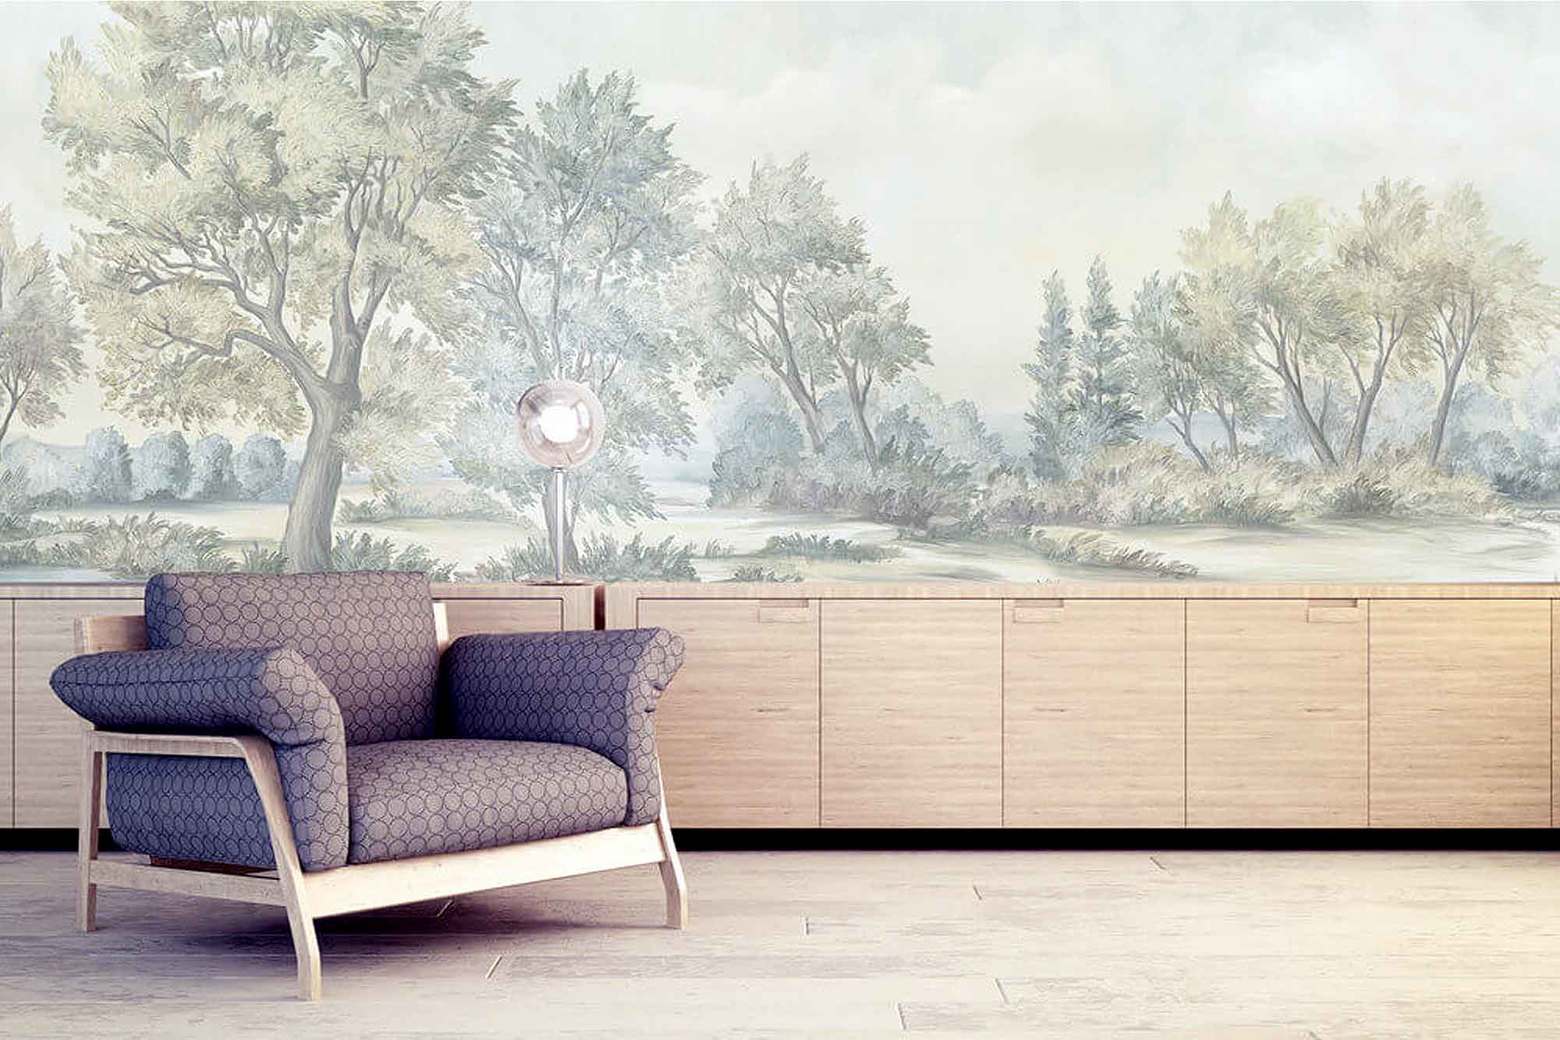 Designed In Washington, Susan Harter’s Murals, Like - Tv With Wall Mount Fireplace Under Lobby - HD Wallpaper 